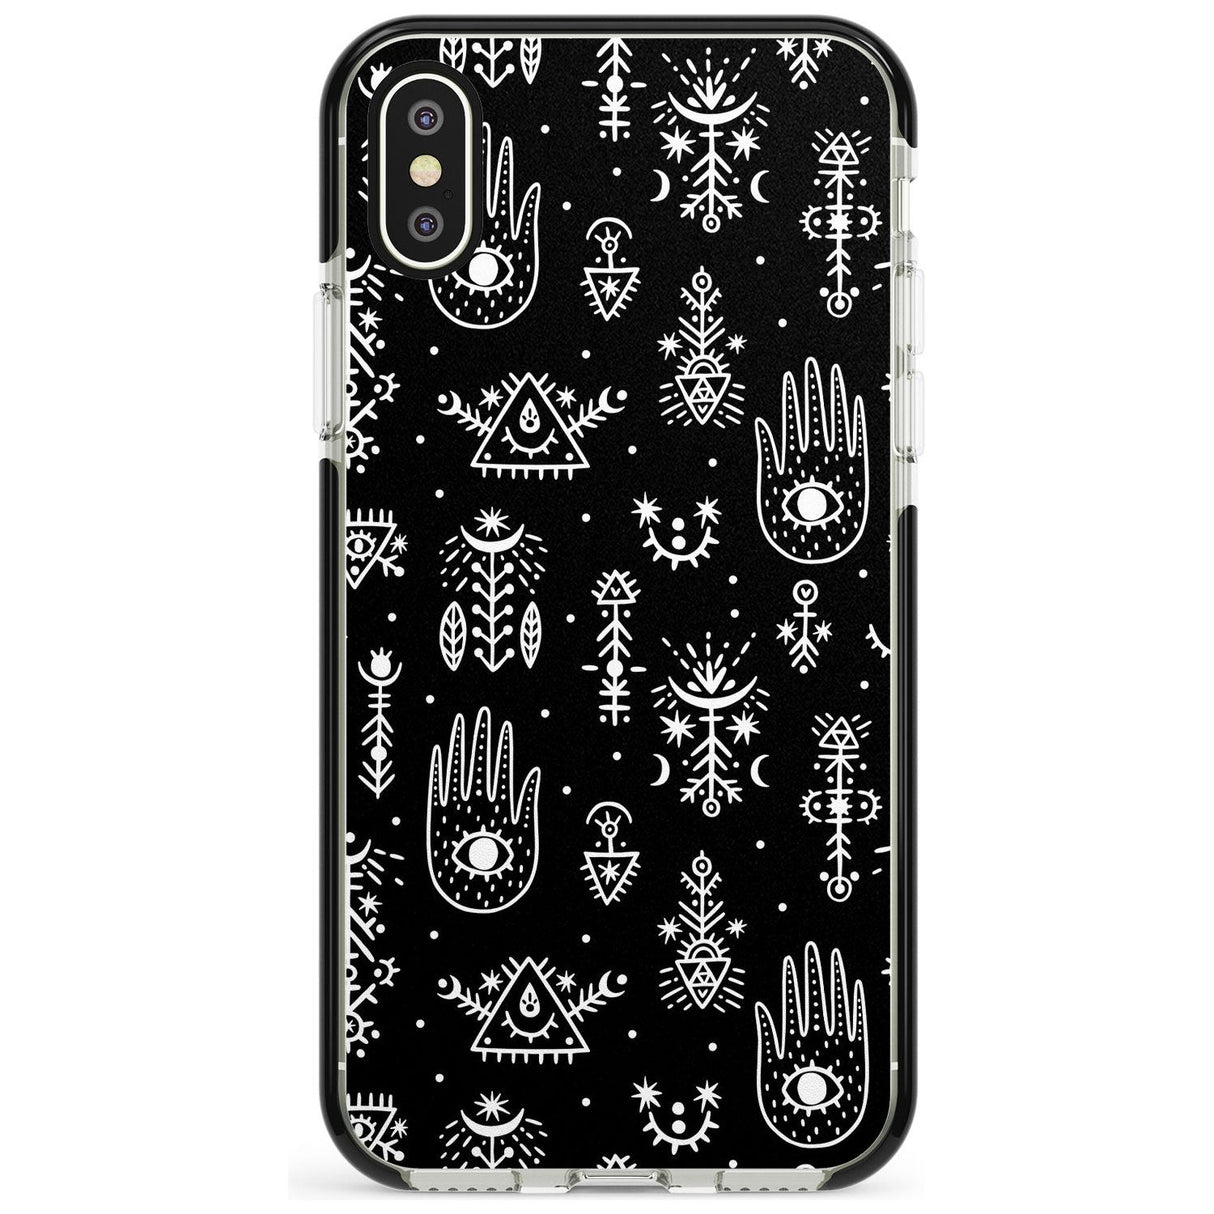 Tribal Palms - White on Black Black Impact Phone Case for iPhone X XS Max XR